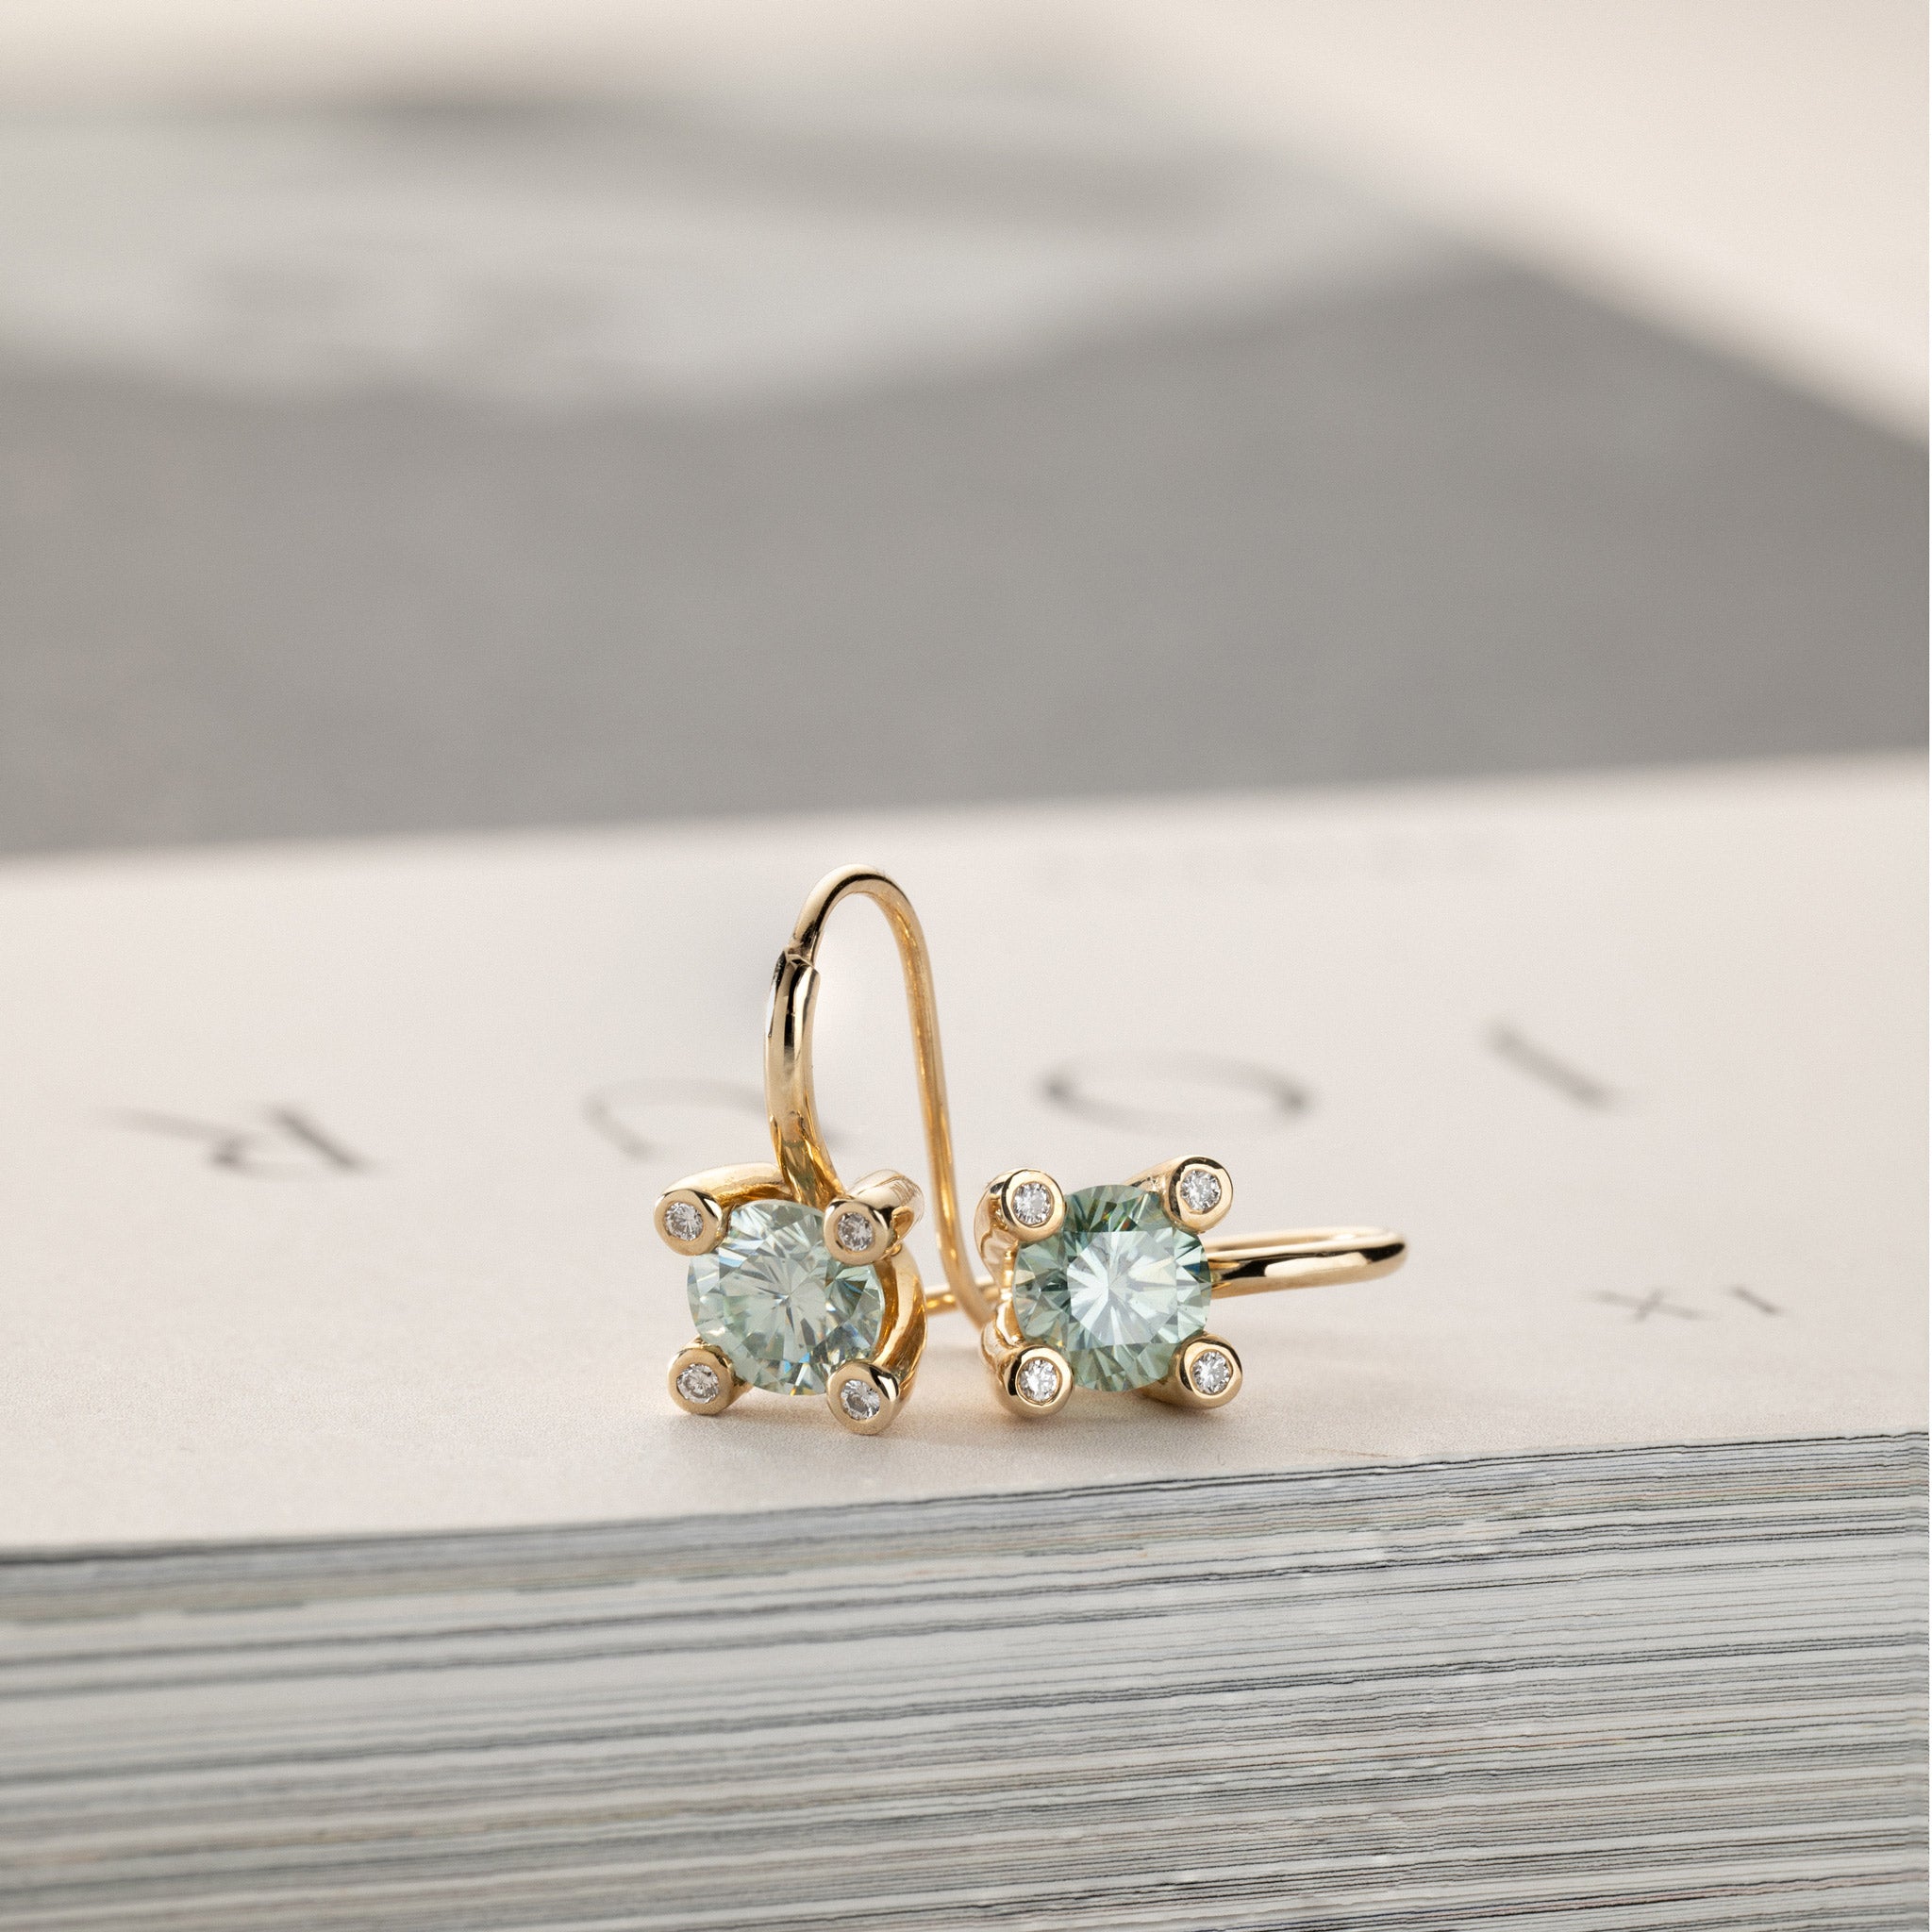 10K Yellow Gold solitaire earrings 1.5ctw green moissanite diamonds in crown Miriam